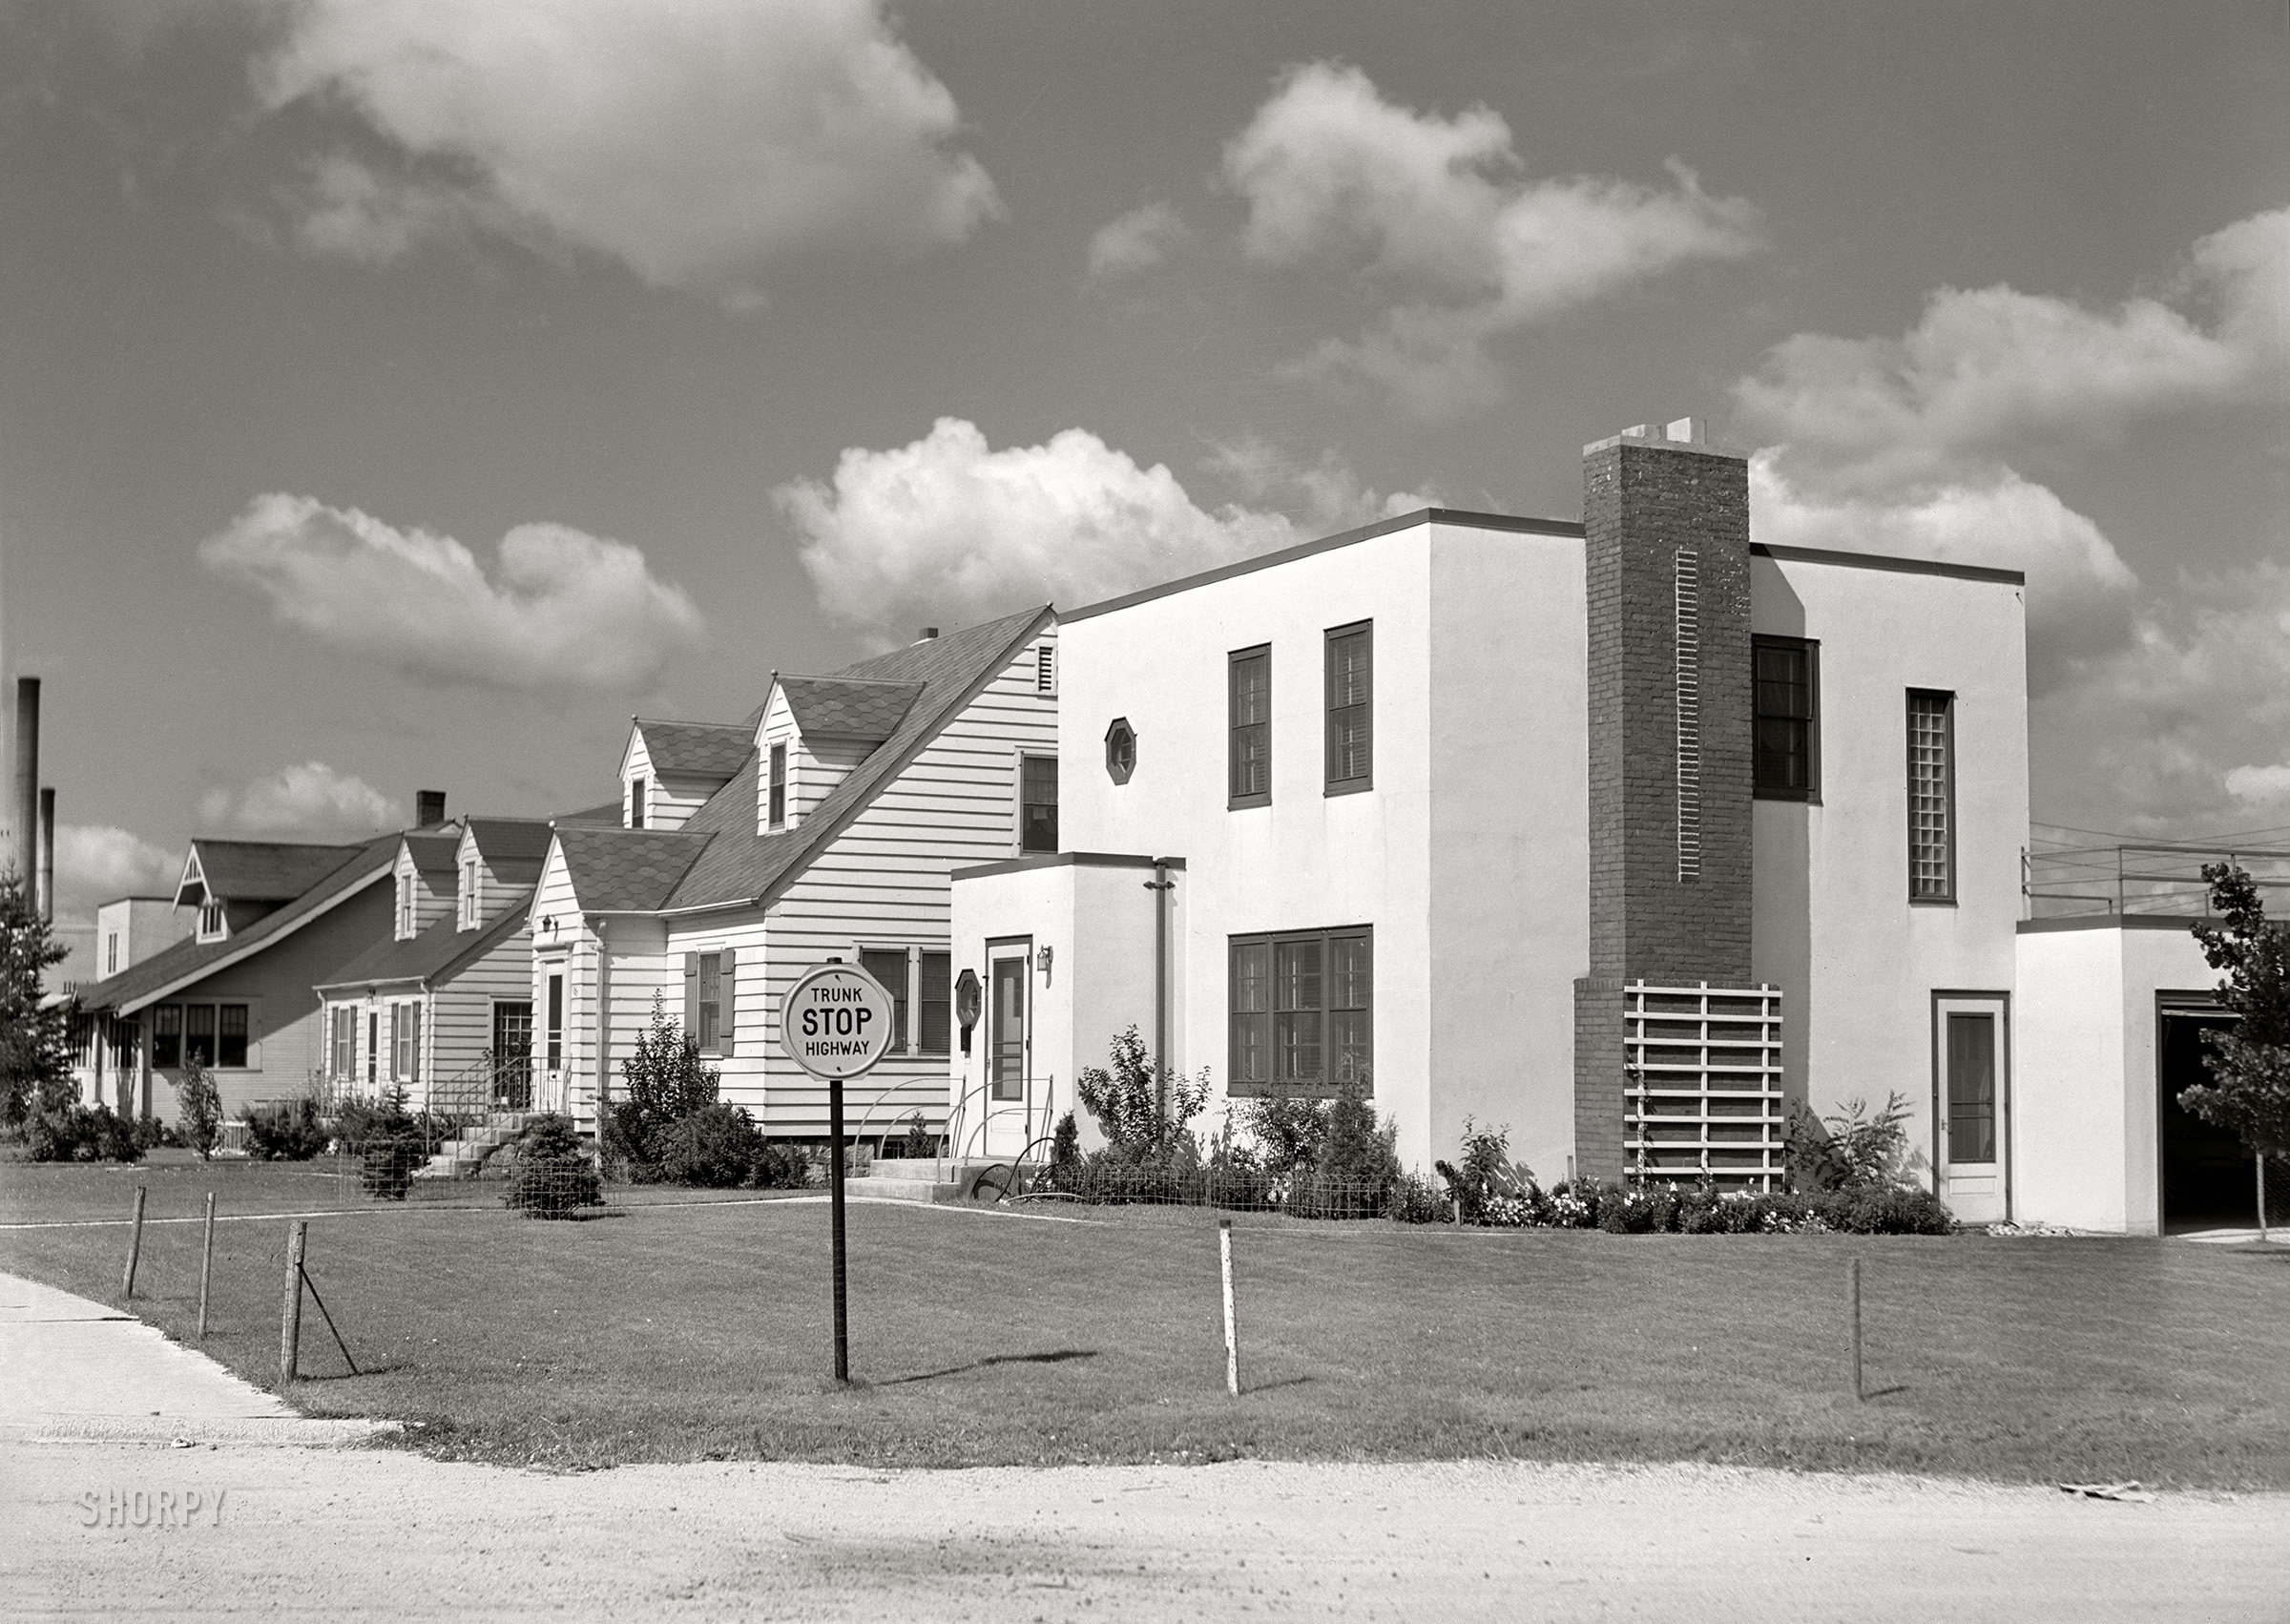 August 1941. "Residential section. Hibbing, Minnesota." The latest thing in houses. Medium format acetate negative by John Vachon for the Farm Security Administration. View full size.